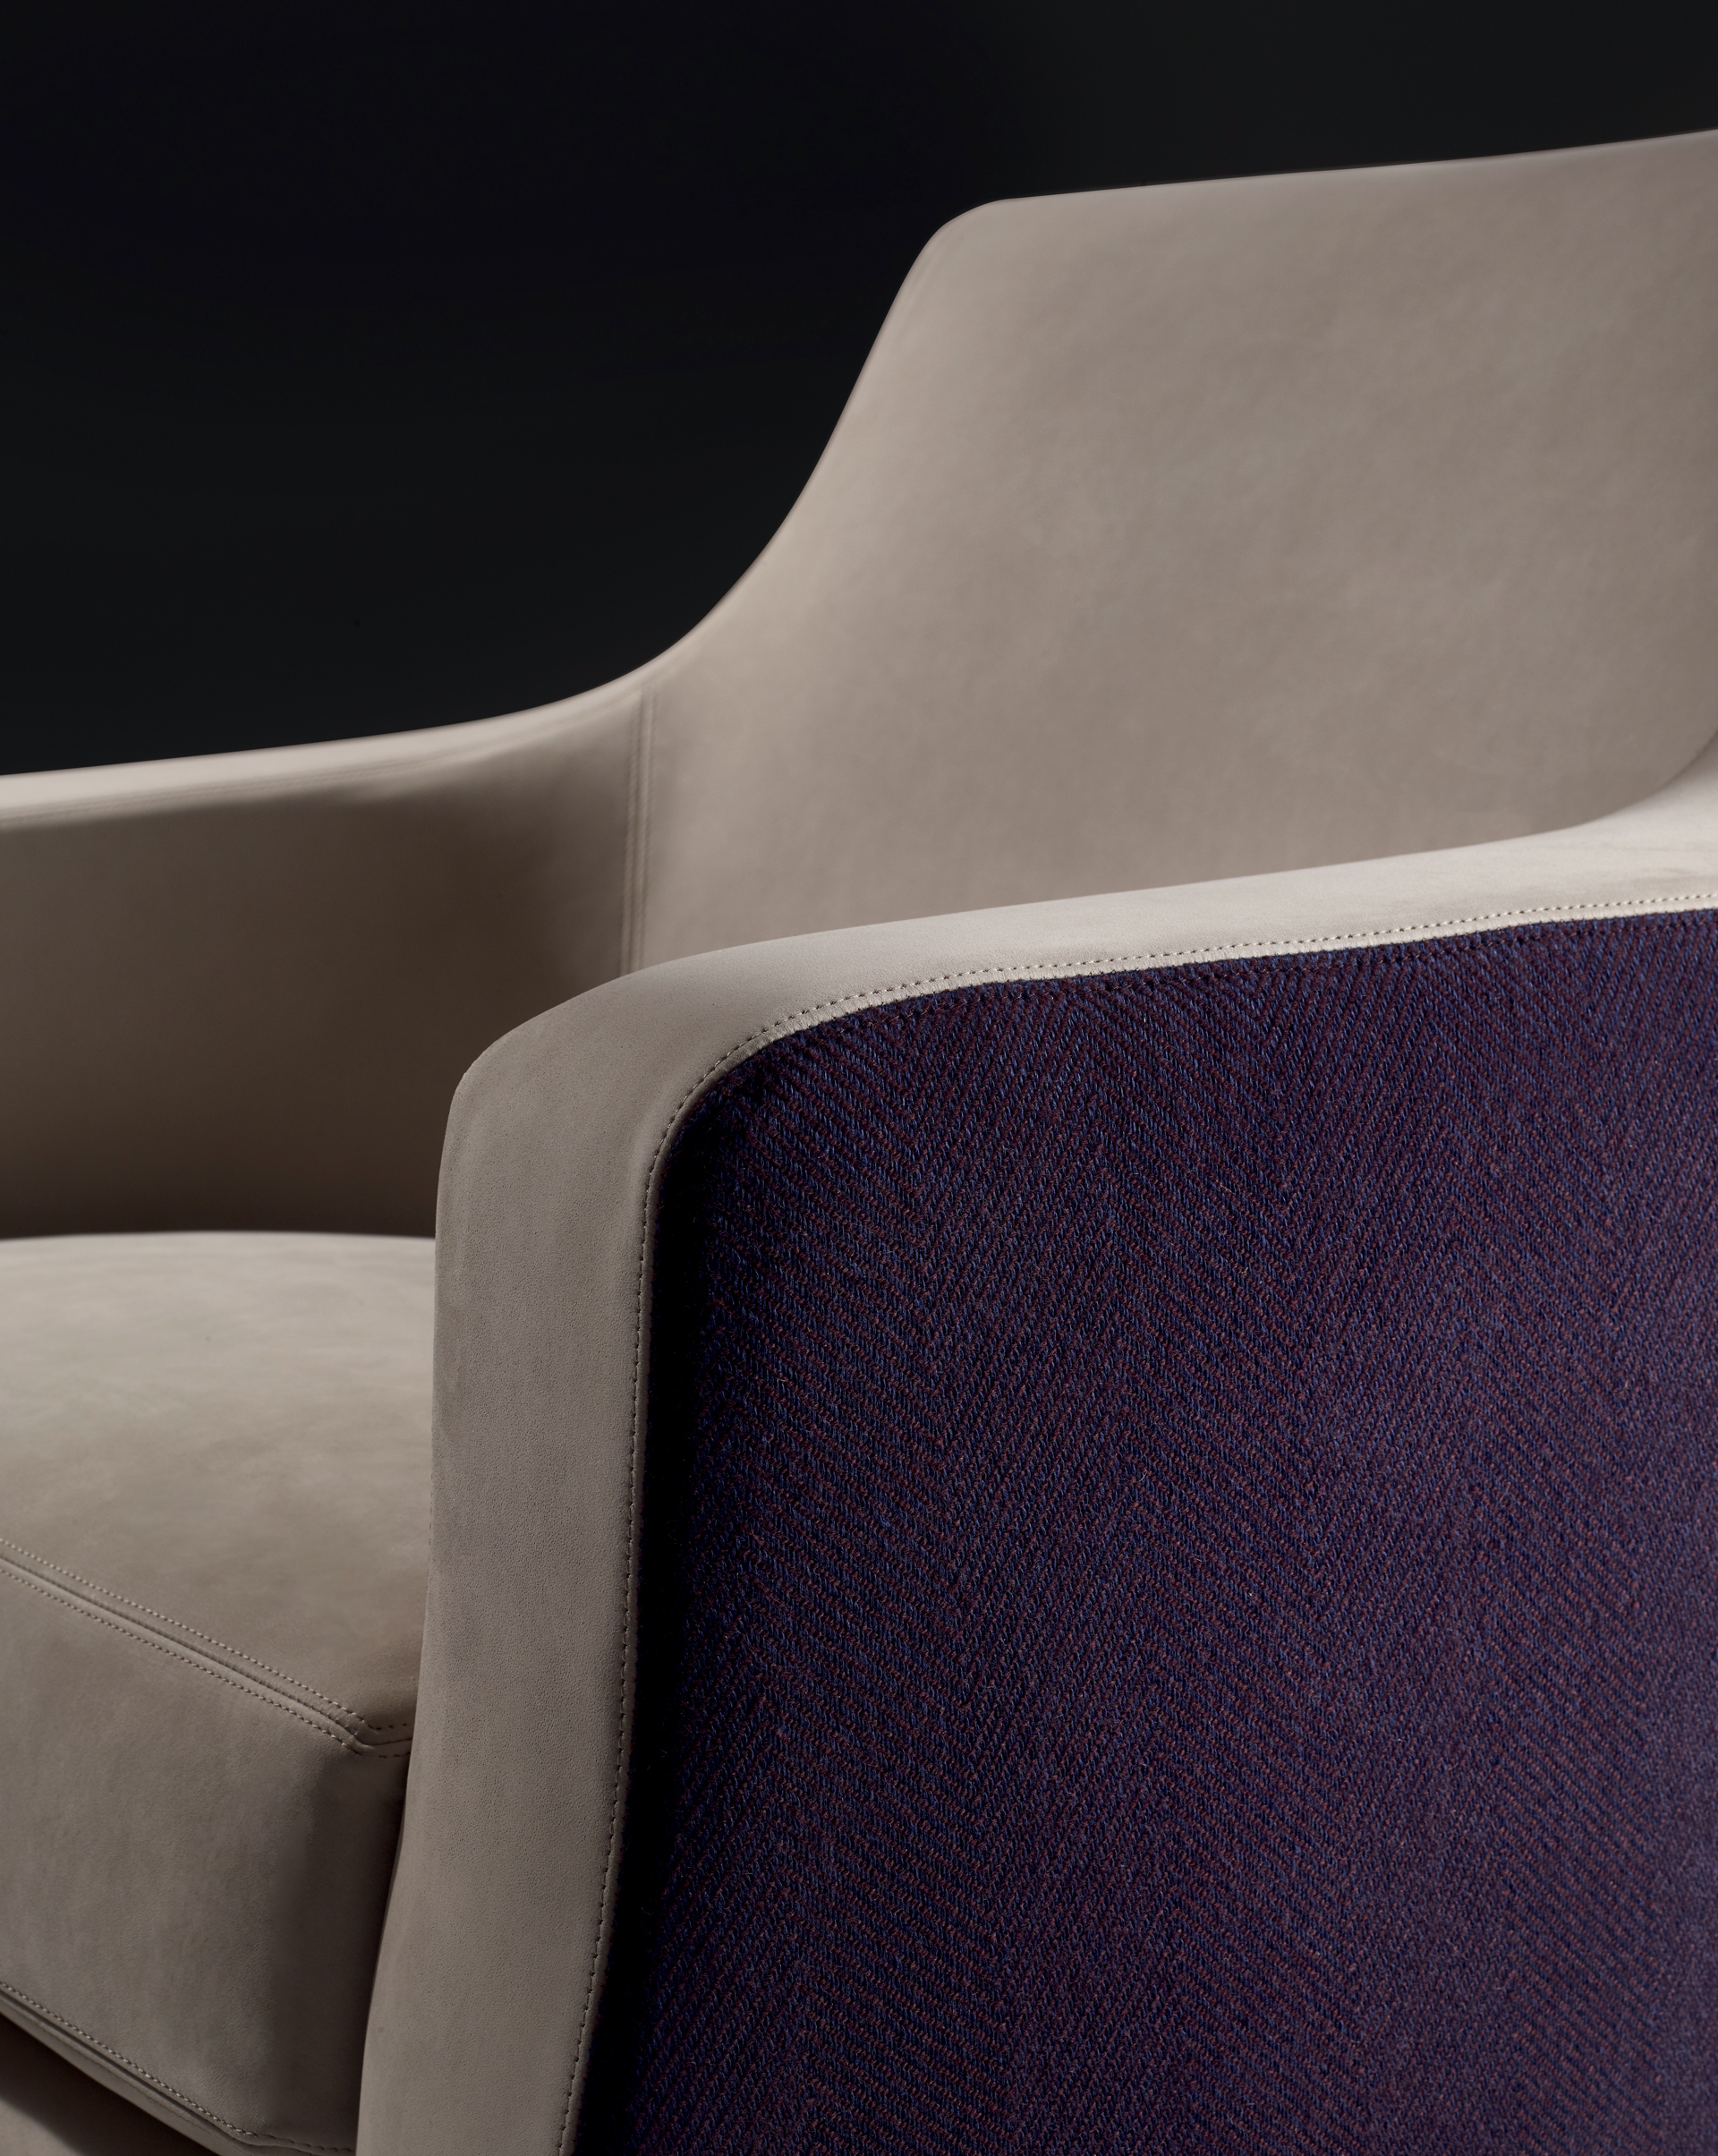 Aziza is a wooden armchair covered in fabric or leather, from Promemoria's catalogue | Promemoria